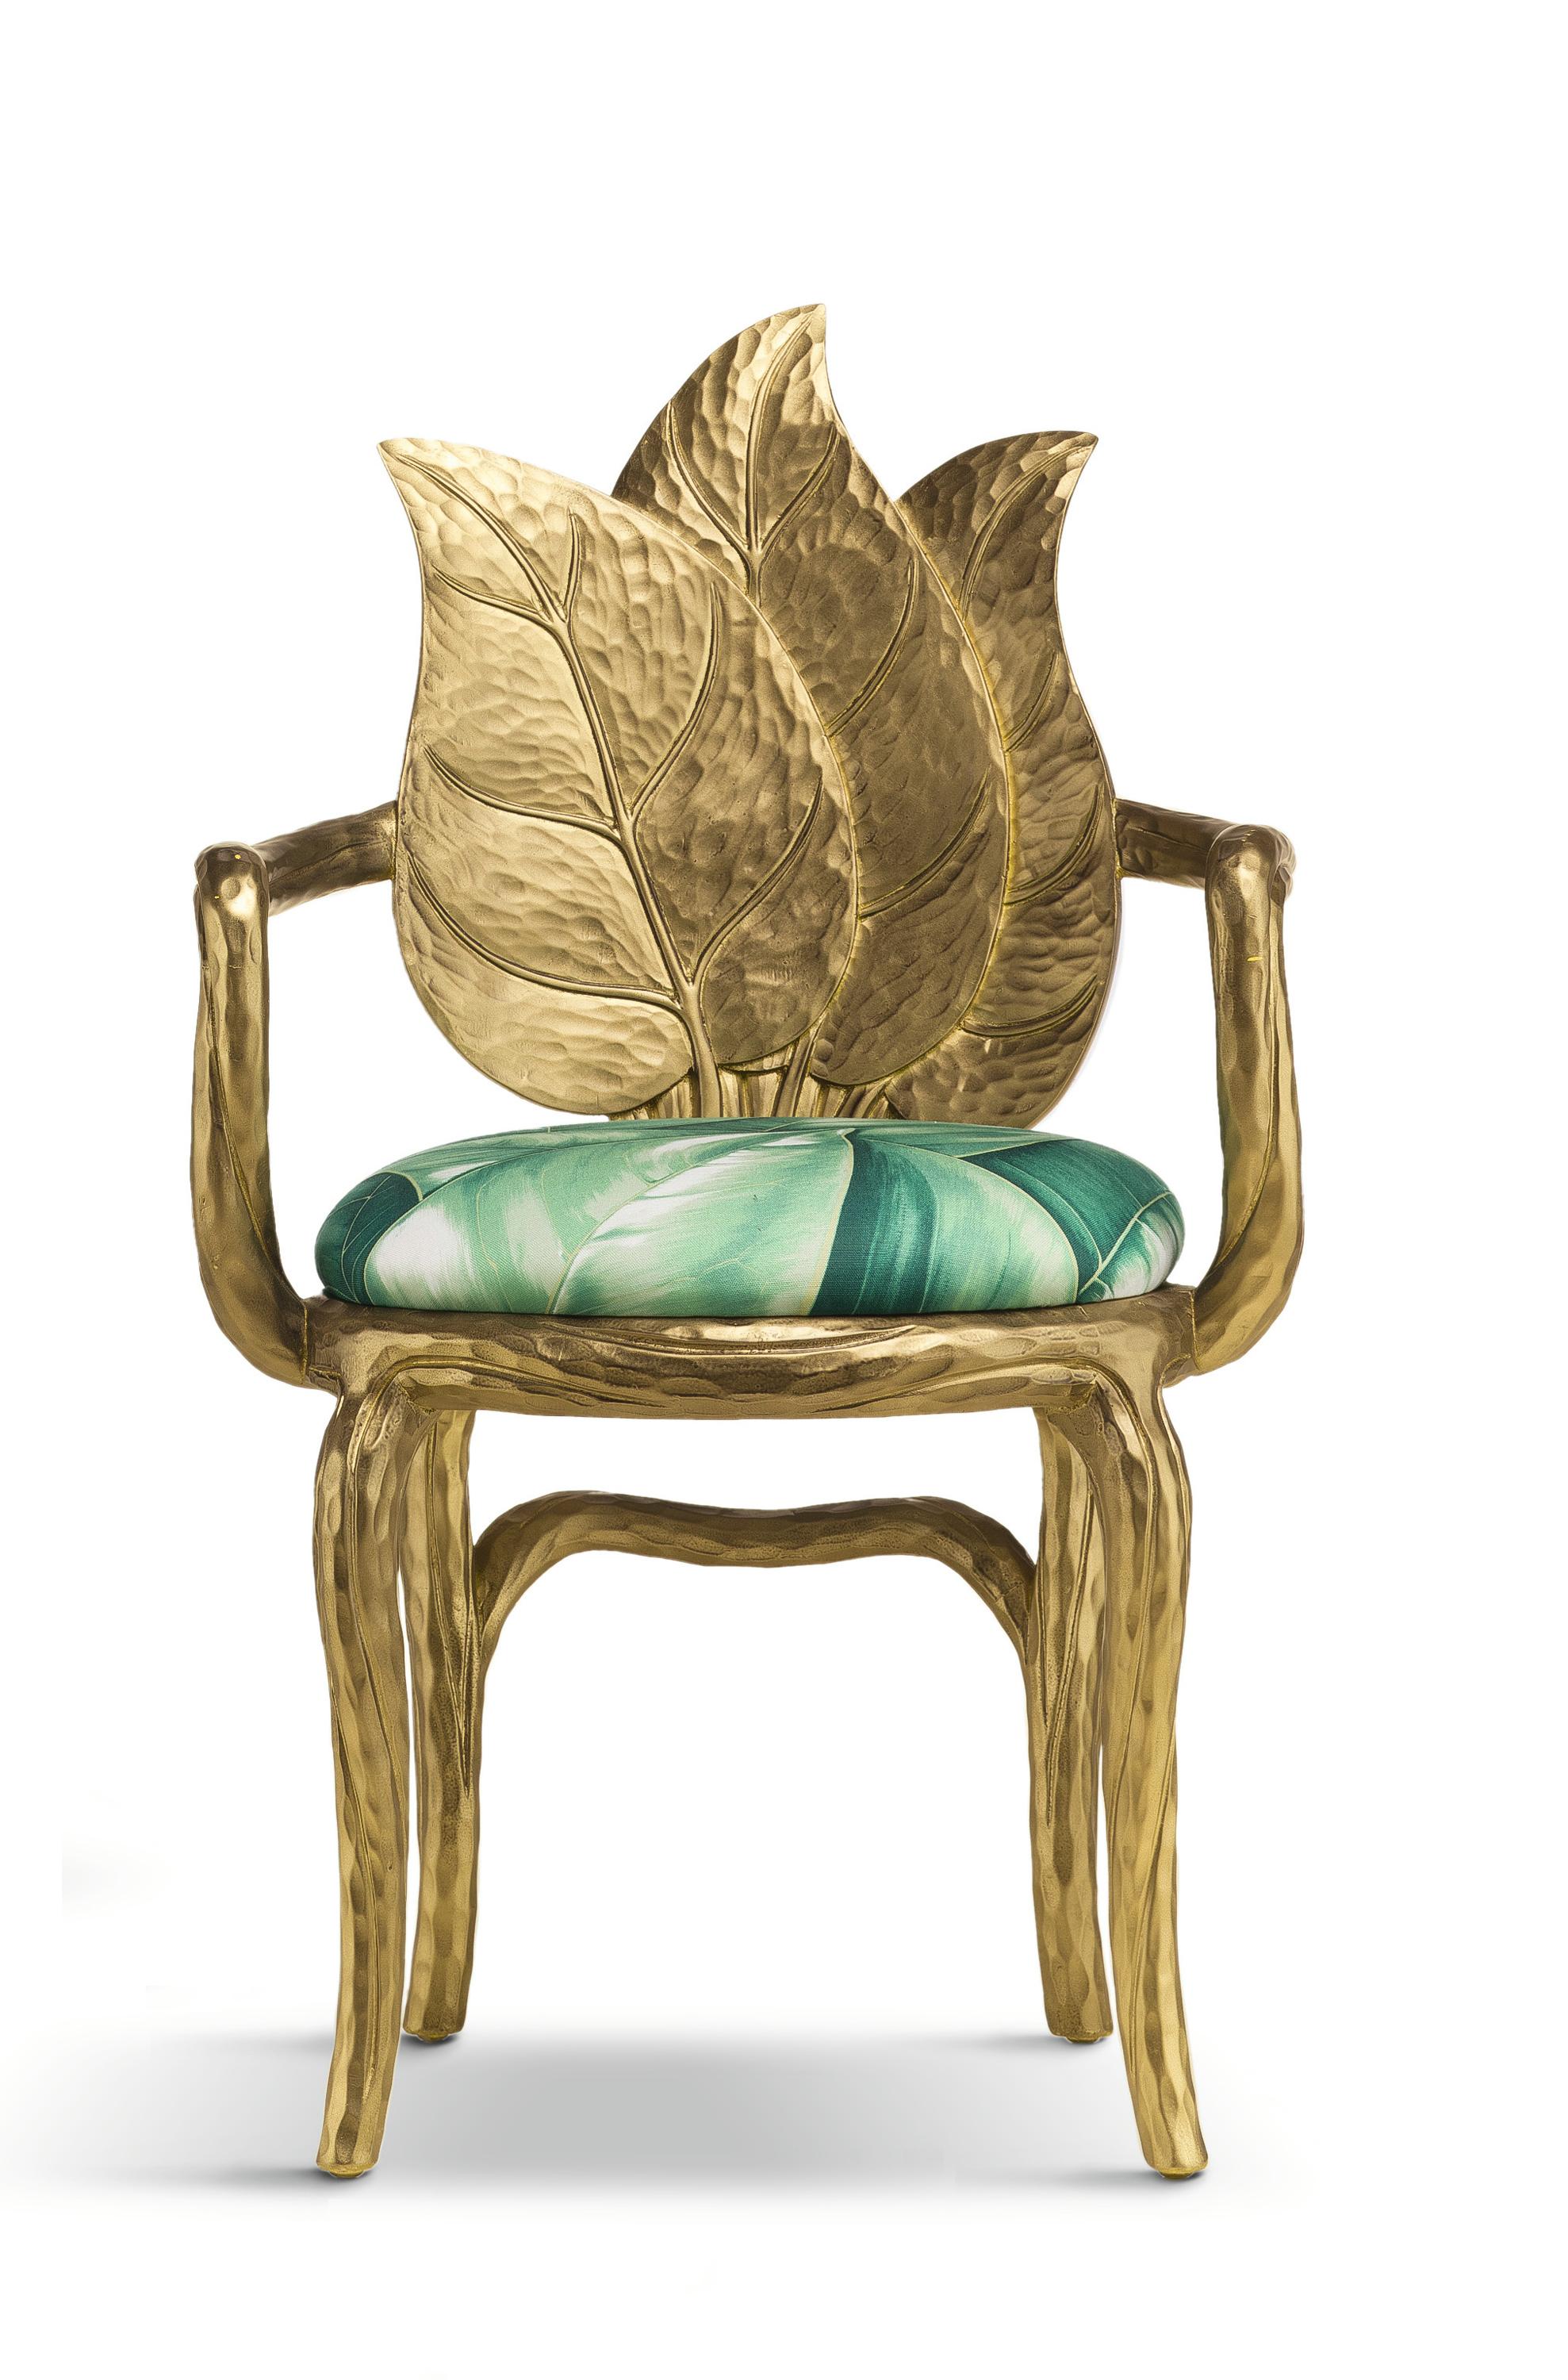 Ferruccio Laviani reinterprets Clorophilla, by Fratelli Boffi, in two versions: an armchair with a back composed of three carved leaves. The project depicts bundles of leaves sculpted in wood, its legs are veined with slender branches. The motif